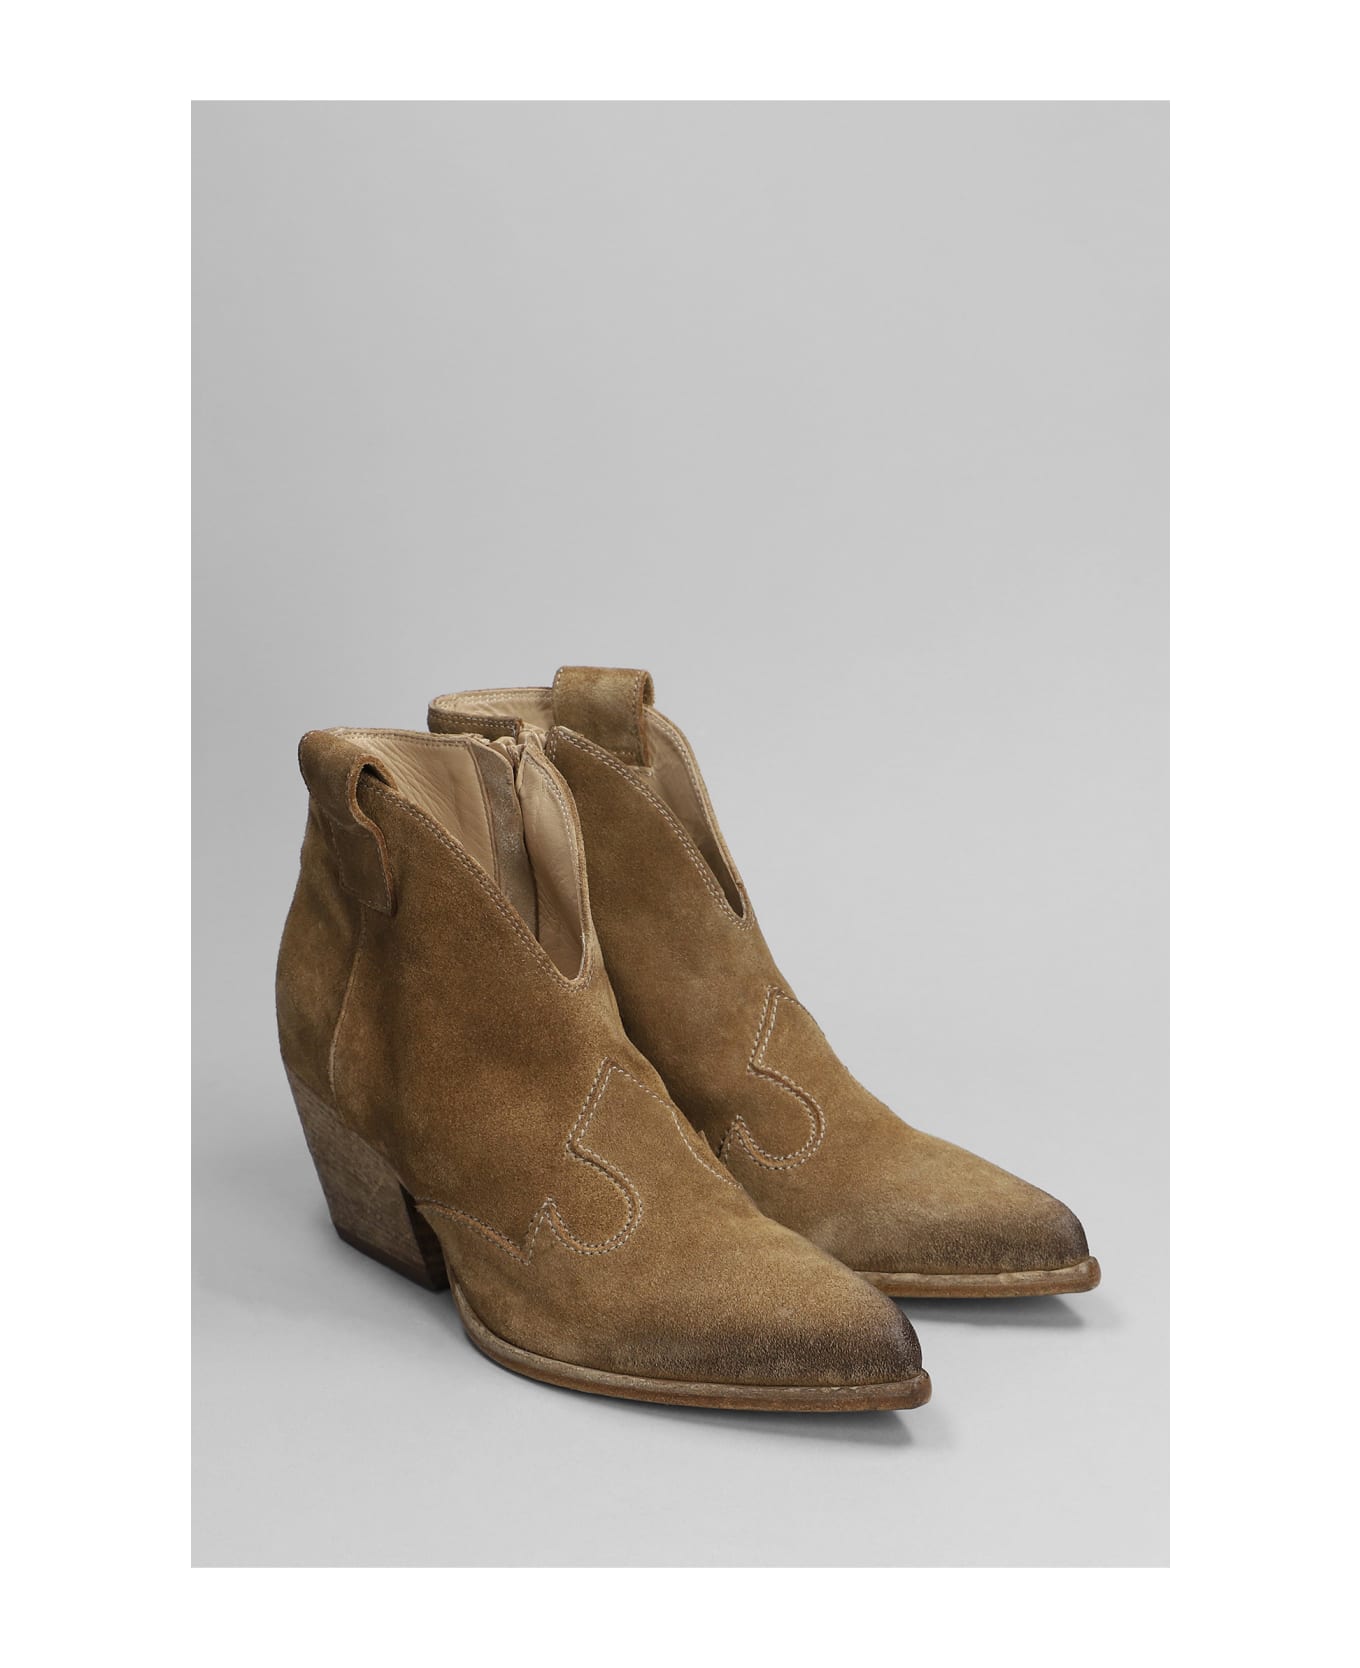 Elena Iachi Texan Ankle Boots In Camel Suede - Camel ブーツ